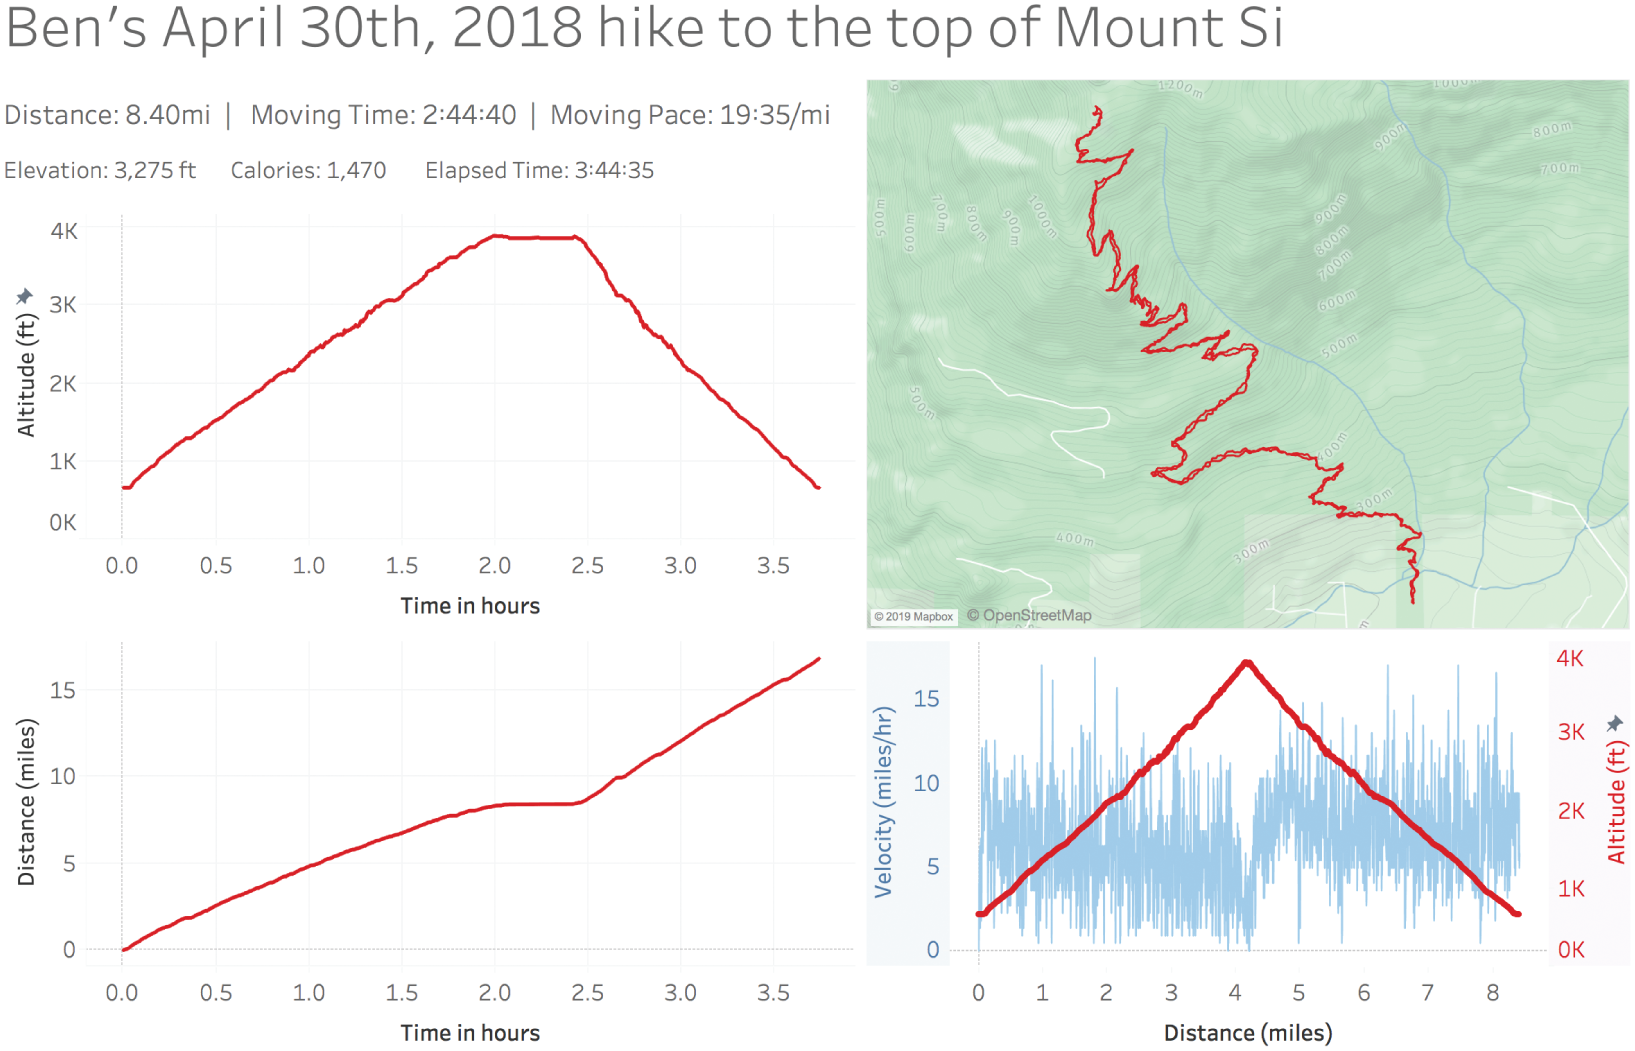 Graphs depicting the extended analysis of the same person's hike to the top of a mountain in the year 2018.